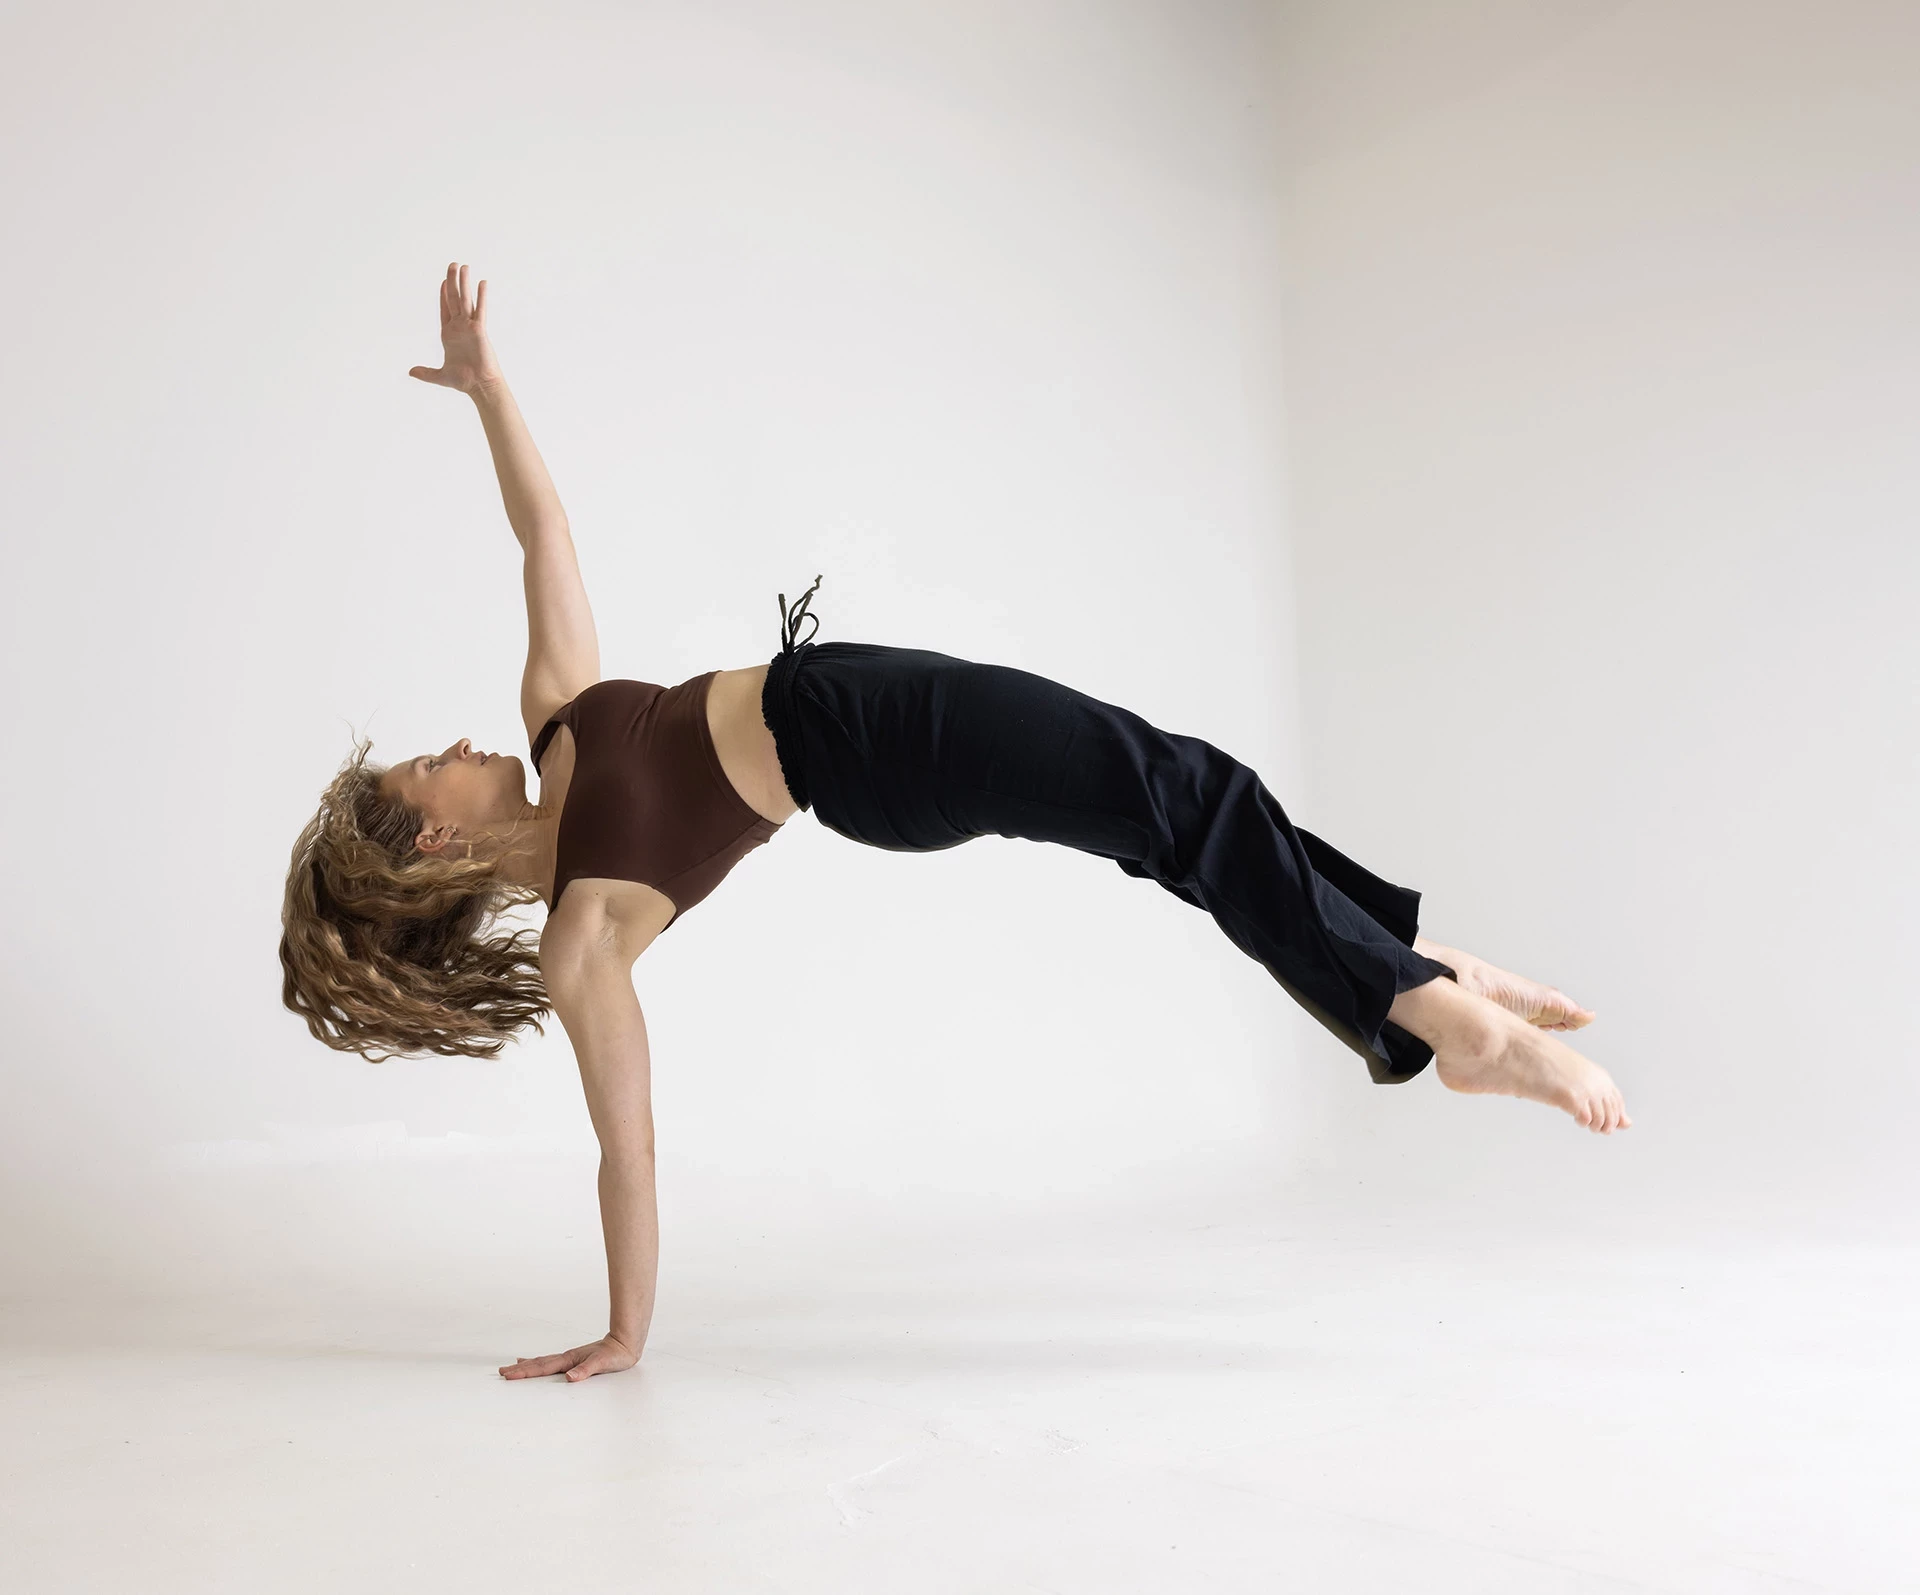 Dancer in a white studio lifting herself up on one hand, body parallel with the floor, other hand reaching to the sky.